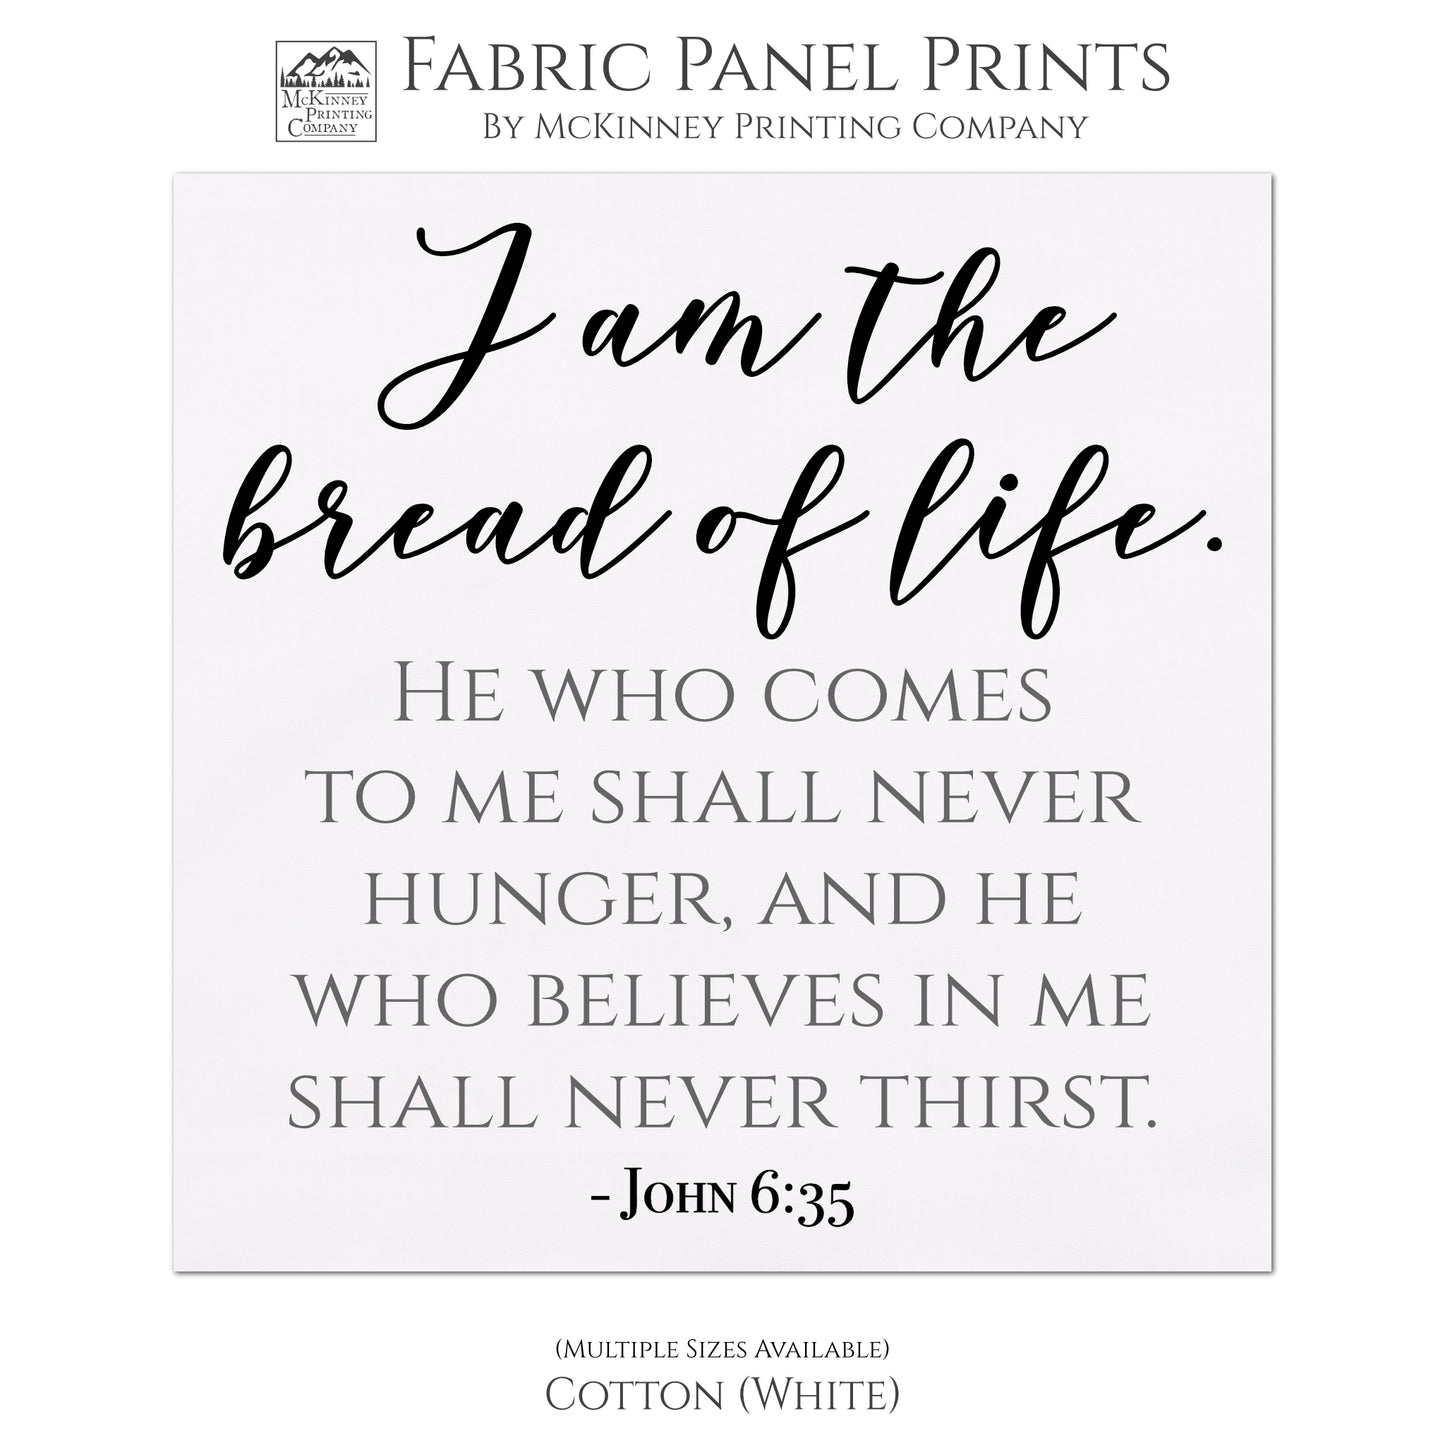 I am the bread of life. He who come to me shall never hunger, and he who believes in me shall never thirst. - John 6:35, Fabric Panel Print, Quilt Block, Wall Hanging, Sewing Craft - Cotton, White